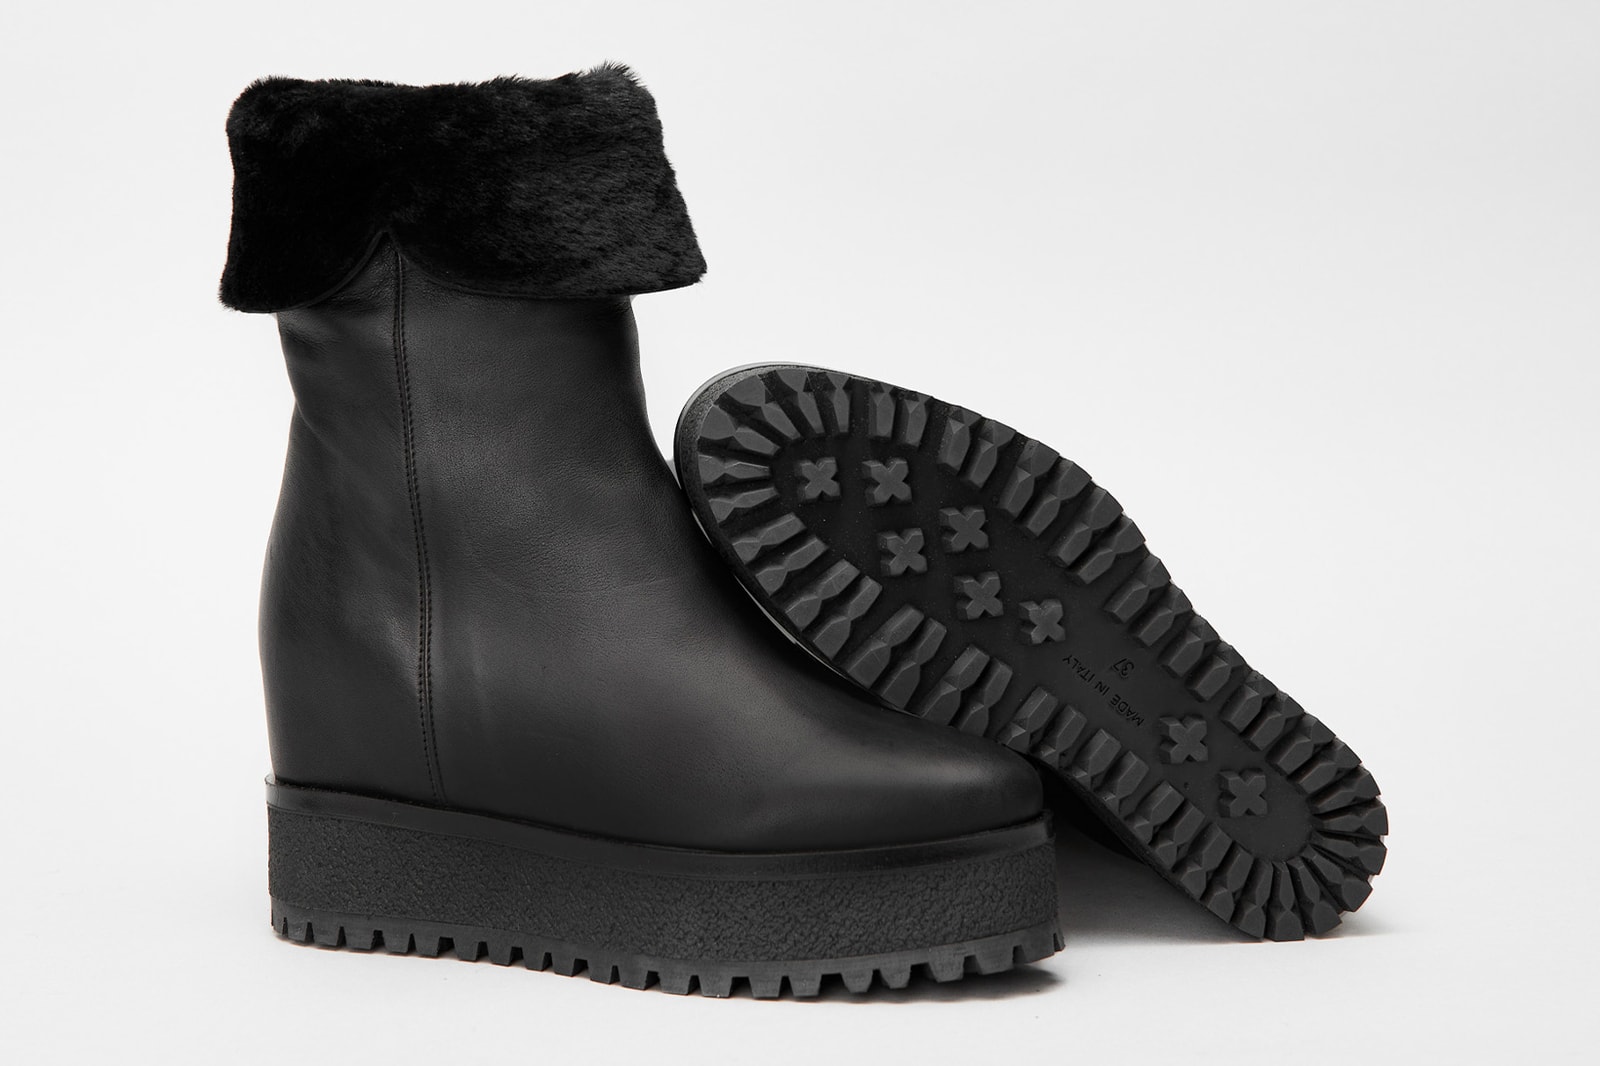 mackage boots winter cold weather warm chunky unisex hero noble rebelle warrior footwear release